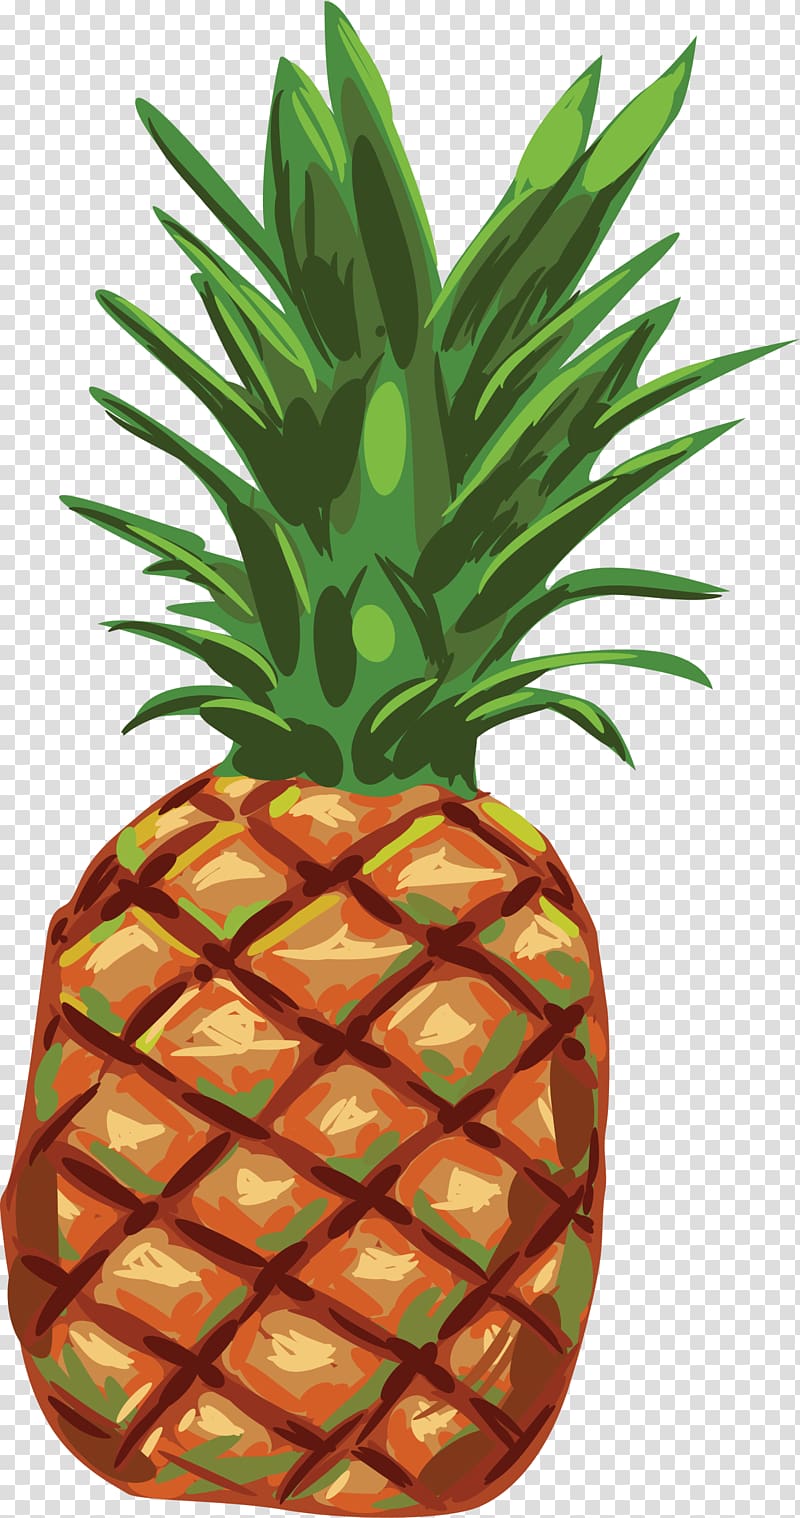 Pineapple Fruit, Green hand painted pineapple transparent background PNG clipart